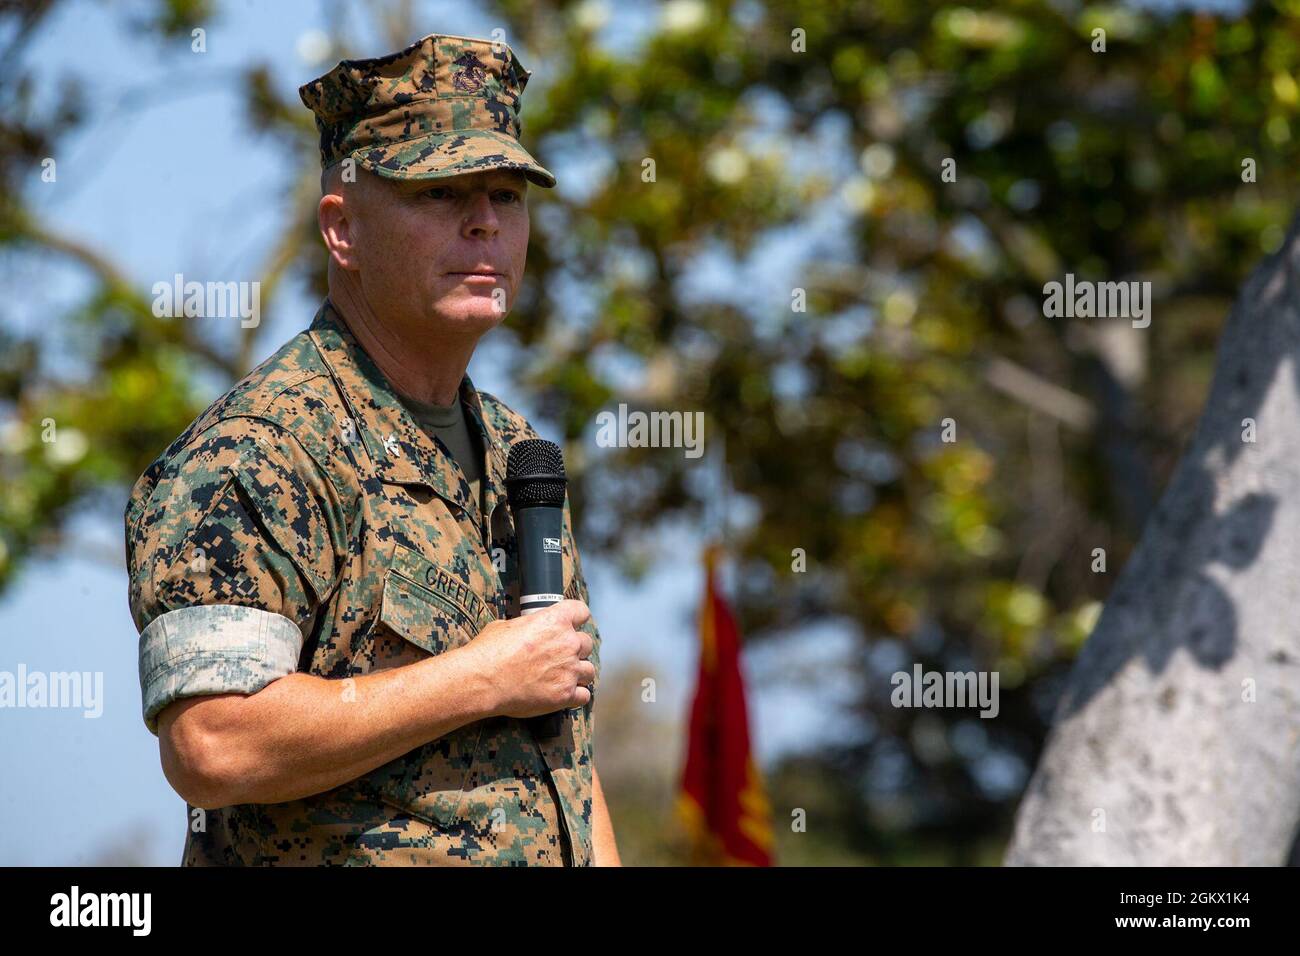 U.S. Marine Col. Edward Greeley, the outgoing commander for Security and Emergency Services Battalion, Marine Corps Base Camp Pendleton, speaks during his change of command ceremony at the Santa Margarita Ranch House on Camp Pendleton, California, July 14, 2021. During the ceremony, Greeley relinquished command to Col. John Black. Greeley had been the commander of SES Bn. since July 2019. Stock Photo